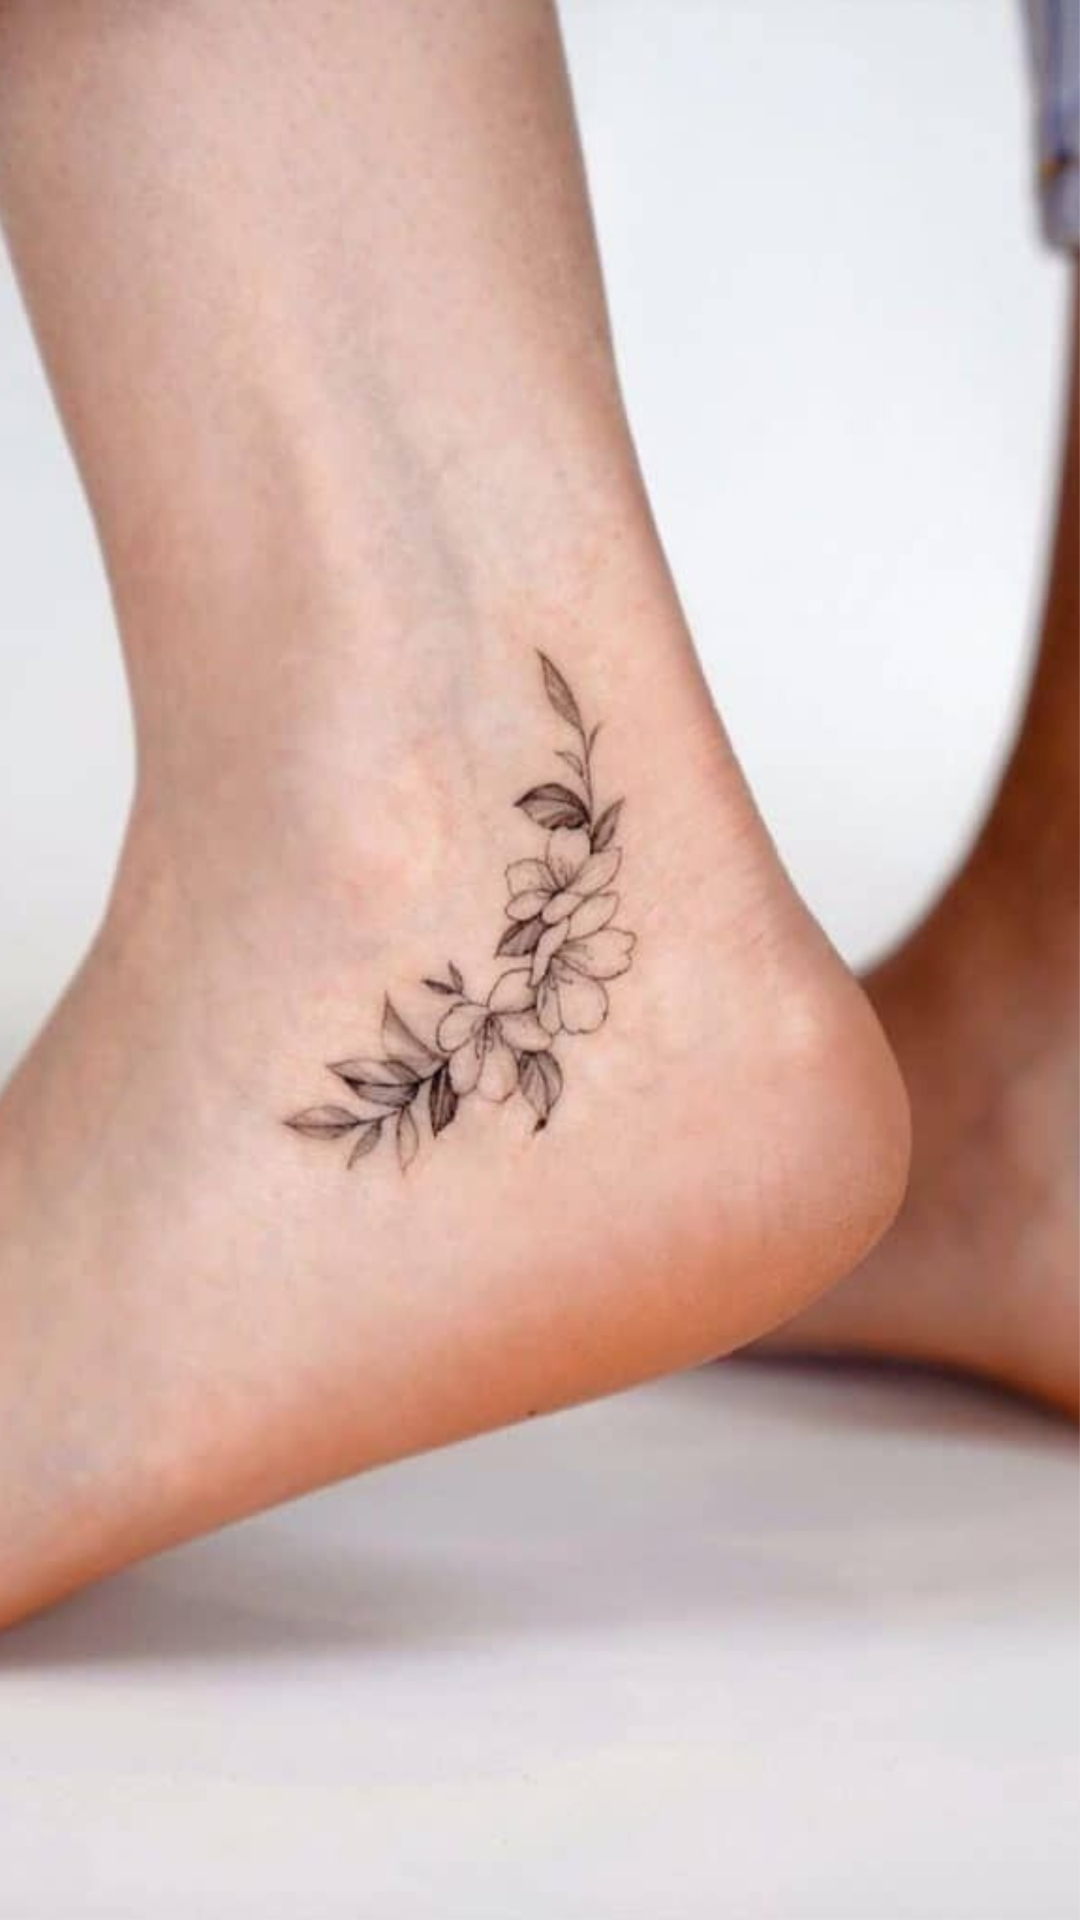 Get Inked with These Tattoo Designs For Good Luck